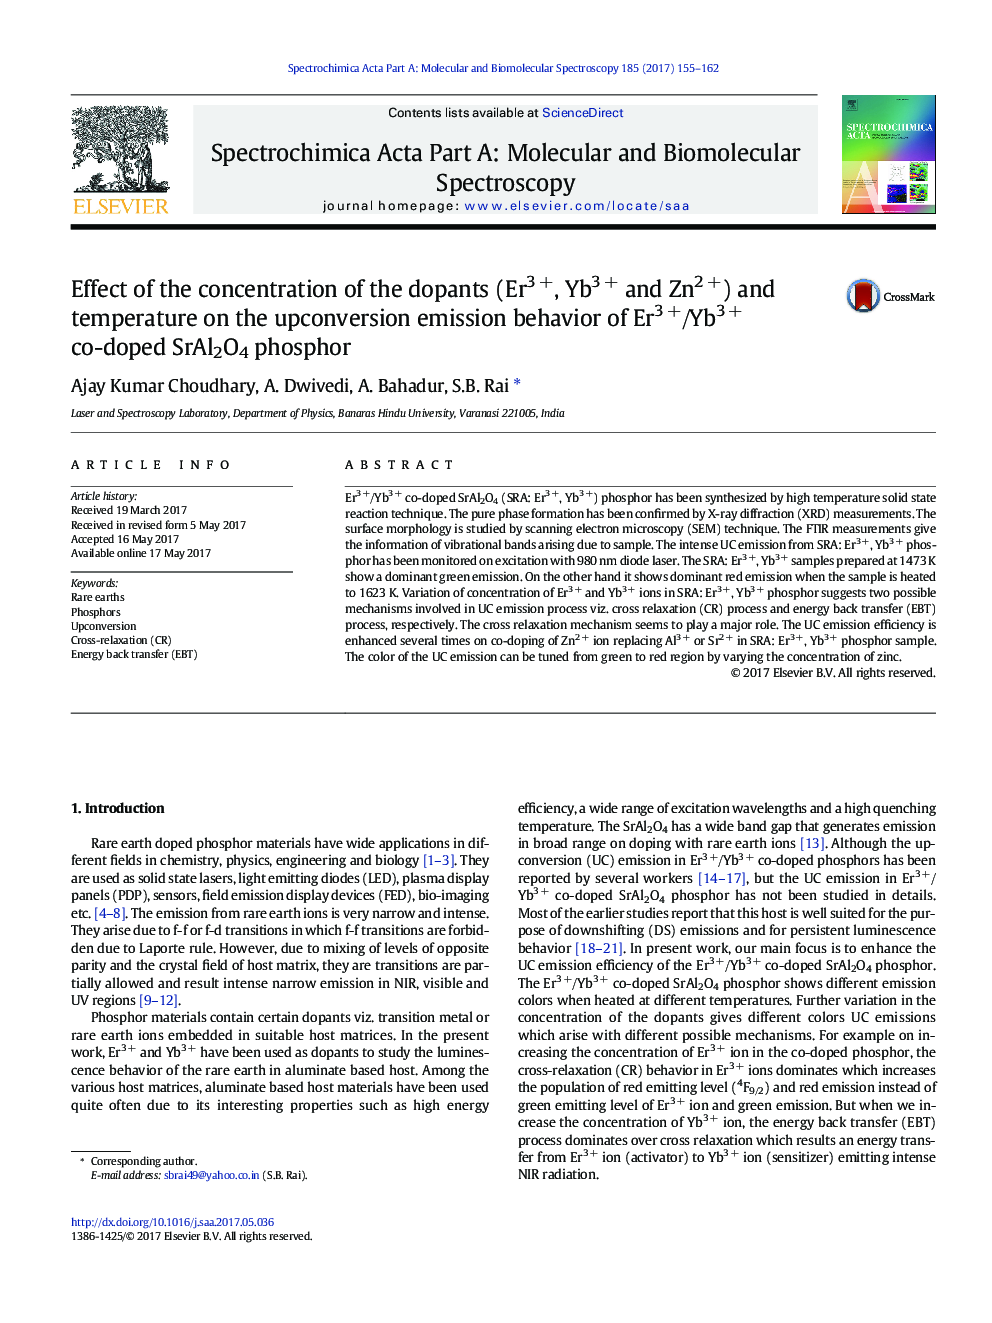 Effect of the concentration of the dopants (Er3Â +, Yb3Â + and Zn2Â +) and temperature on the upconversion emission behavior of Er3Â +/Yb3Â + co-doped SrAl2O4 phosphor